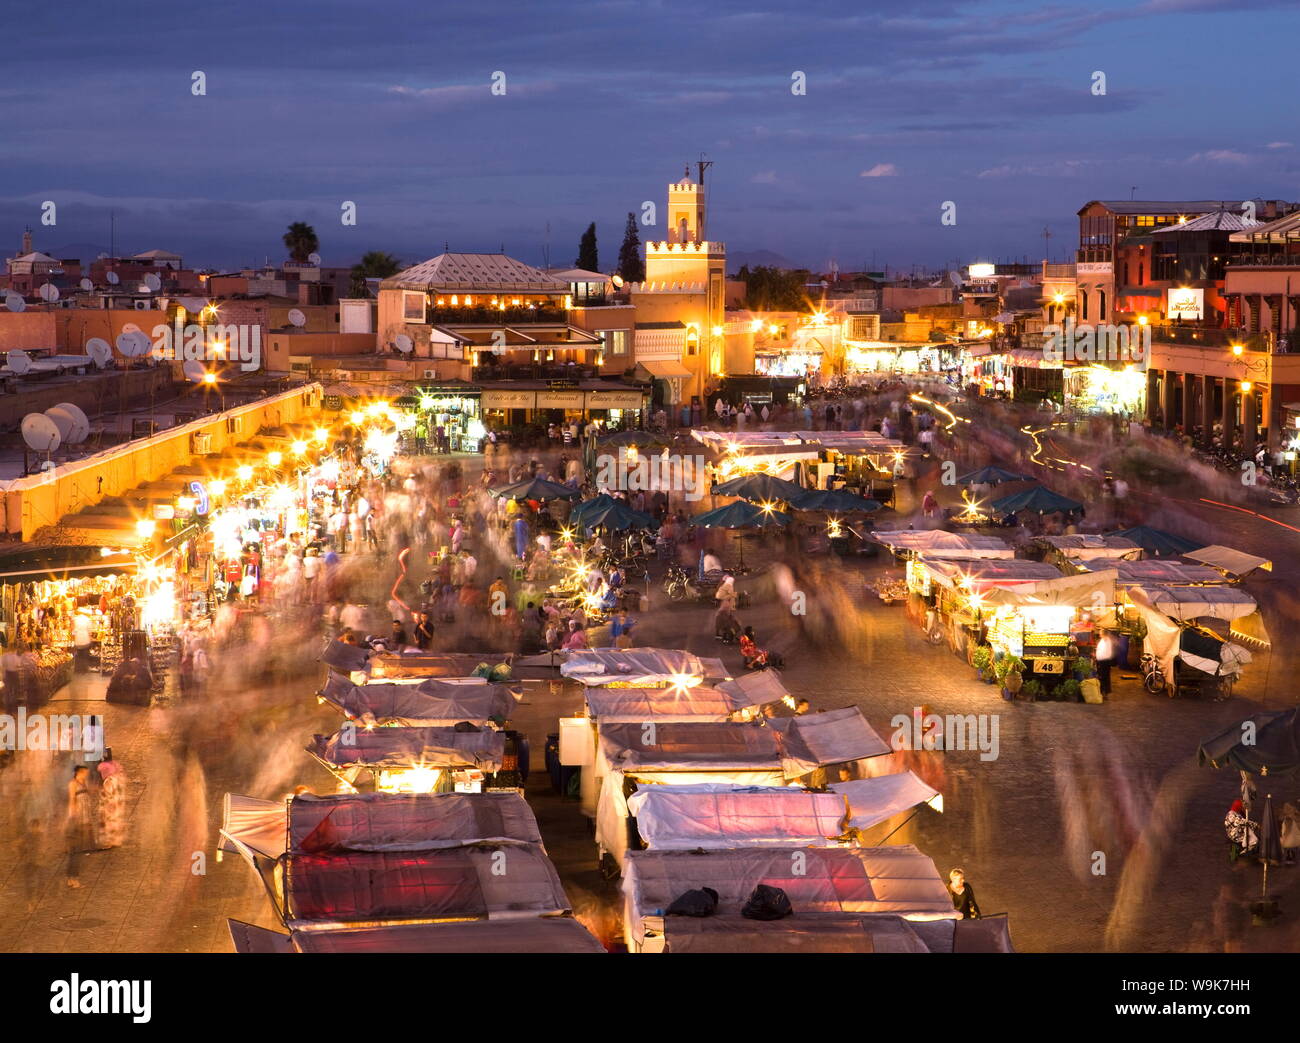 View over Djemaa el Fna at dusk with foodstalls and crowds of people, Marrakech, Morocco, North Africa, Africa Stock Photo